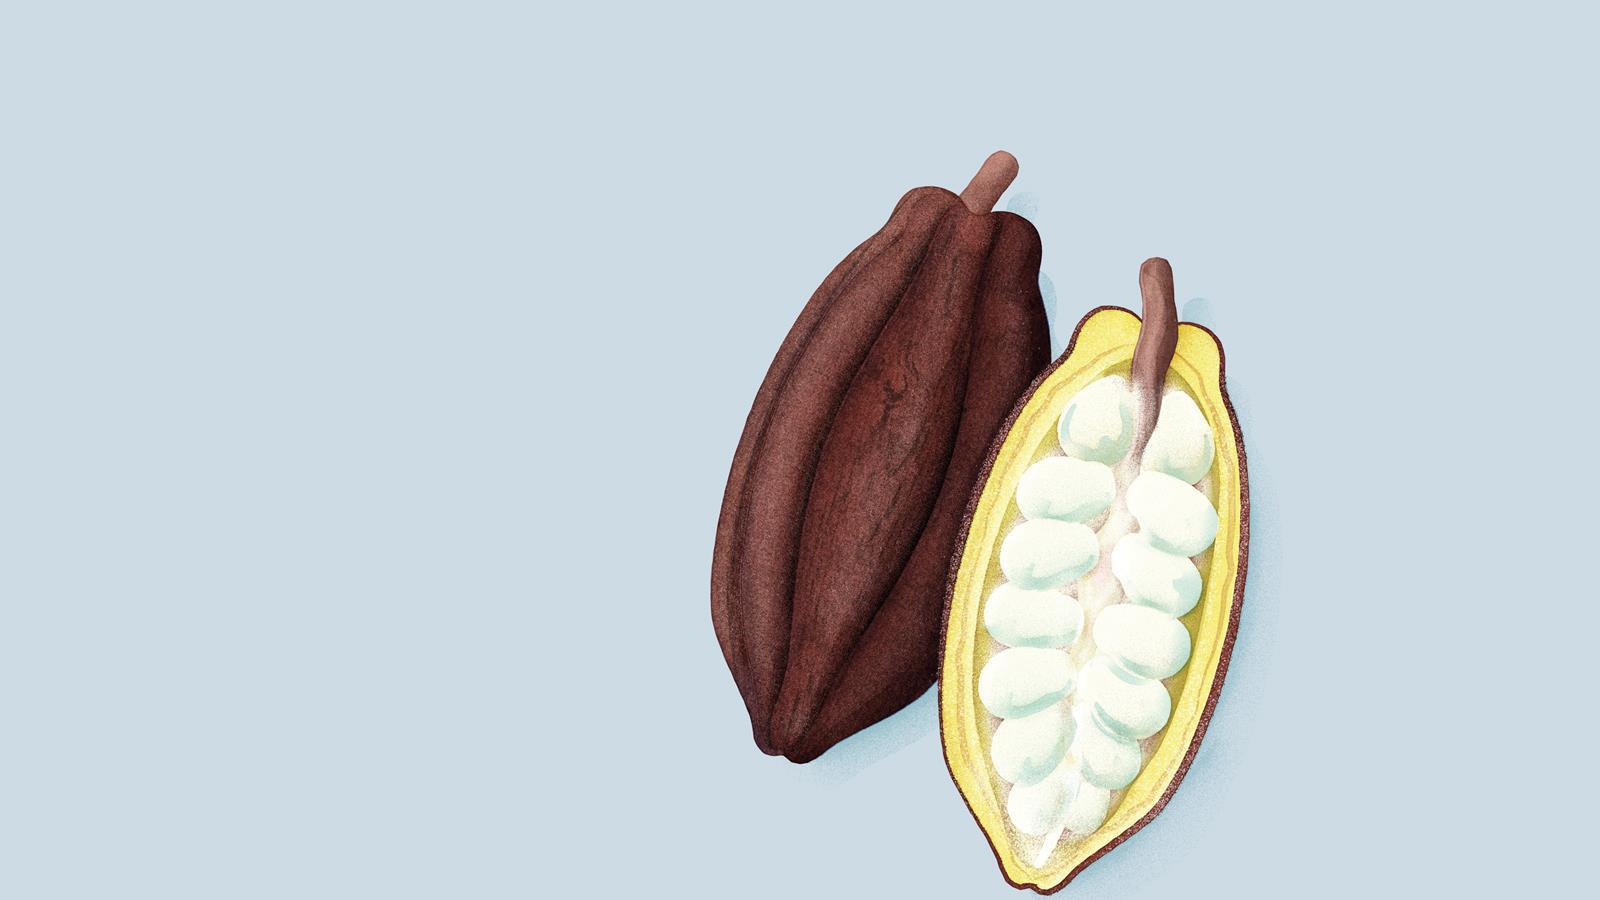 EiC Infographic - 2-cacao pods